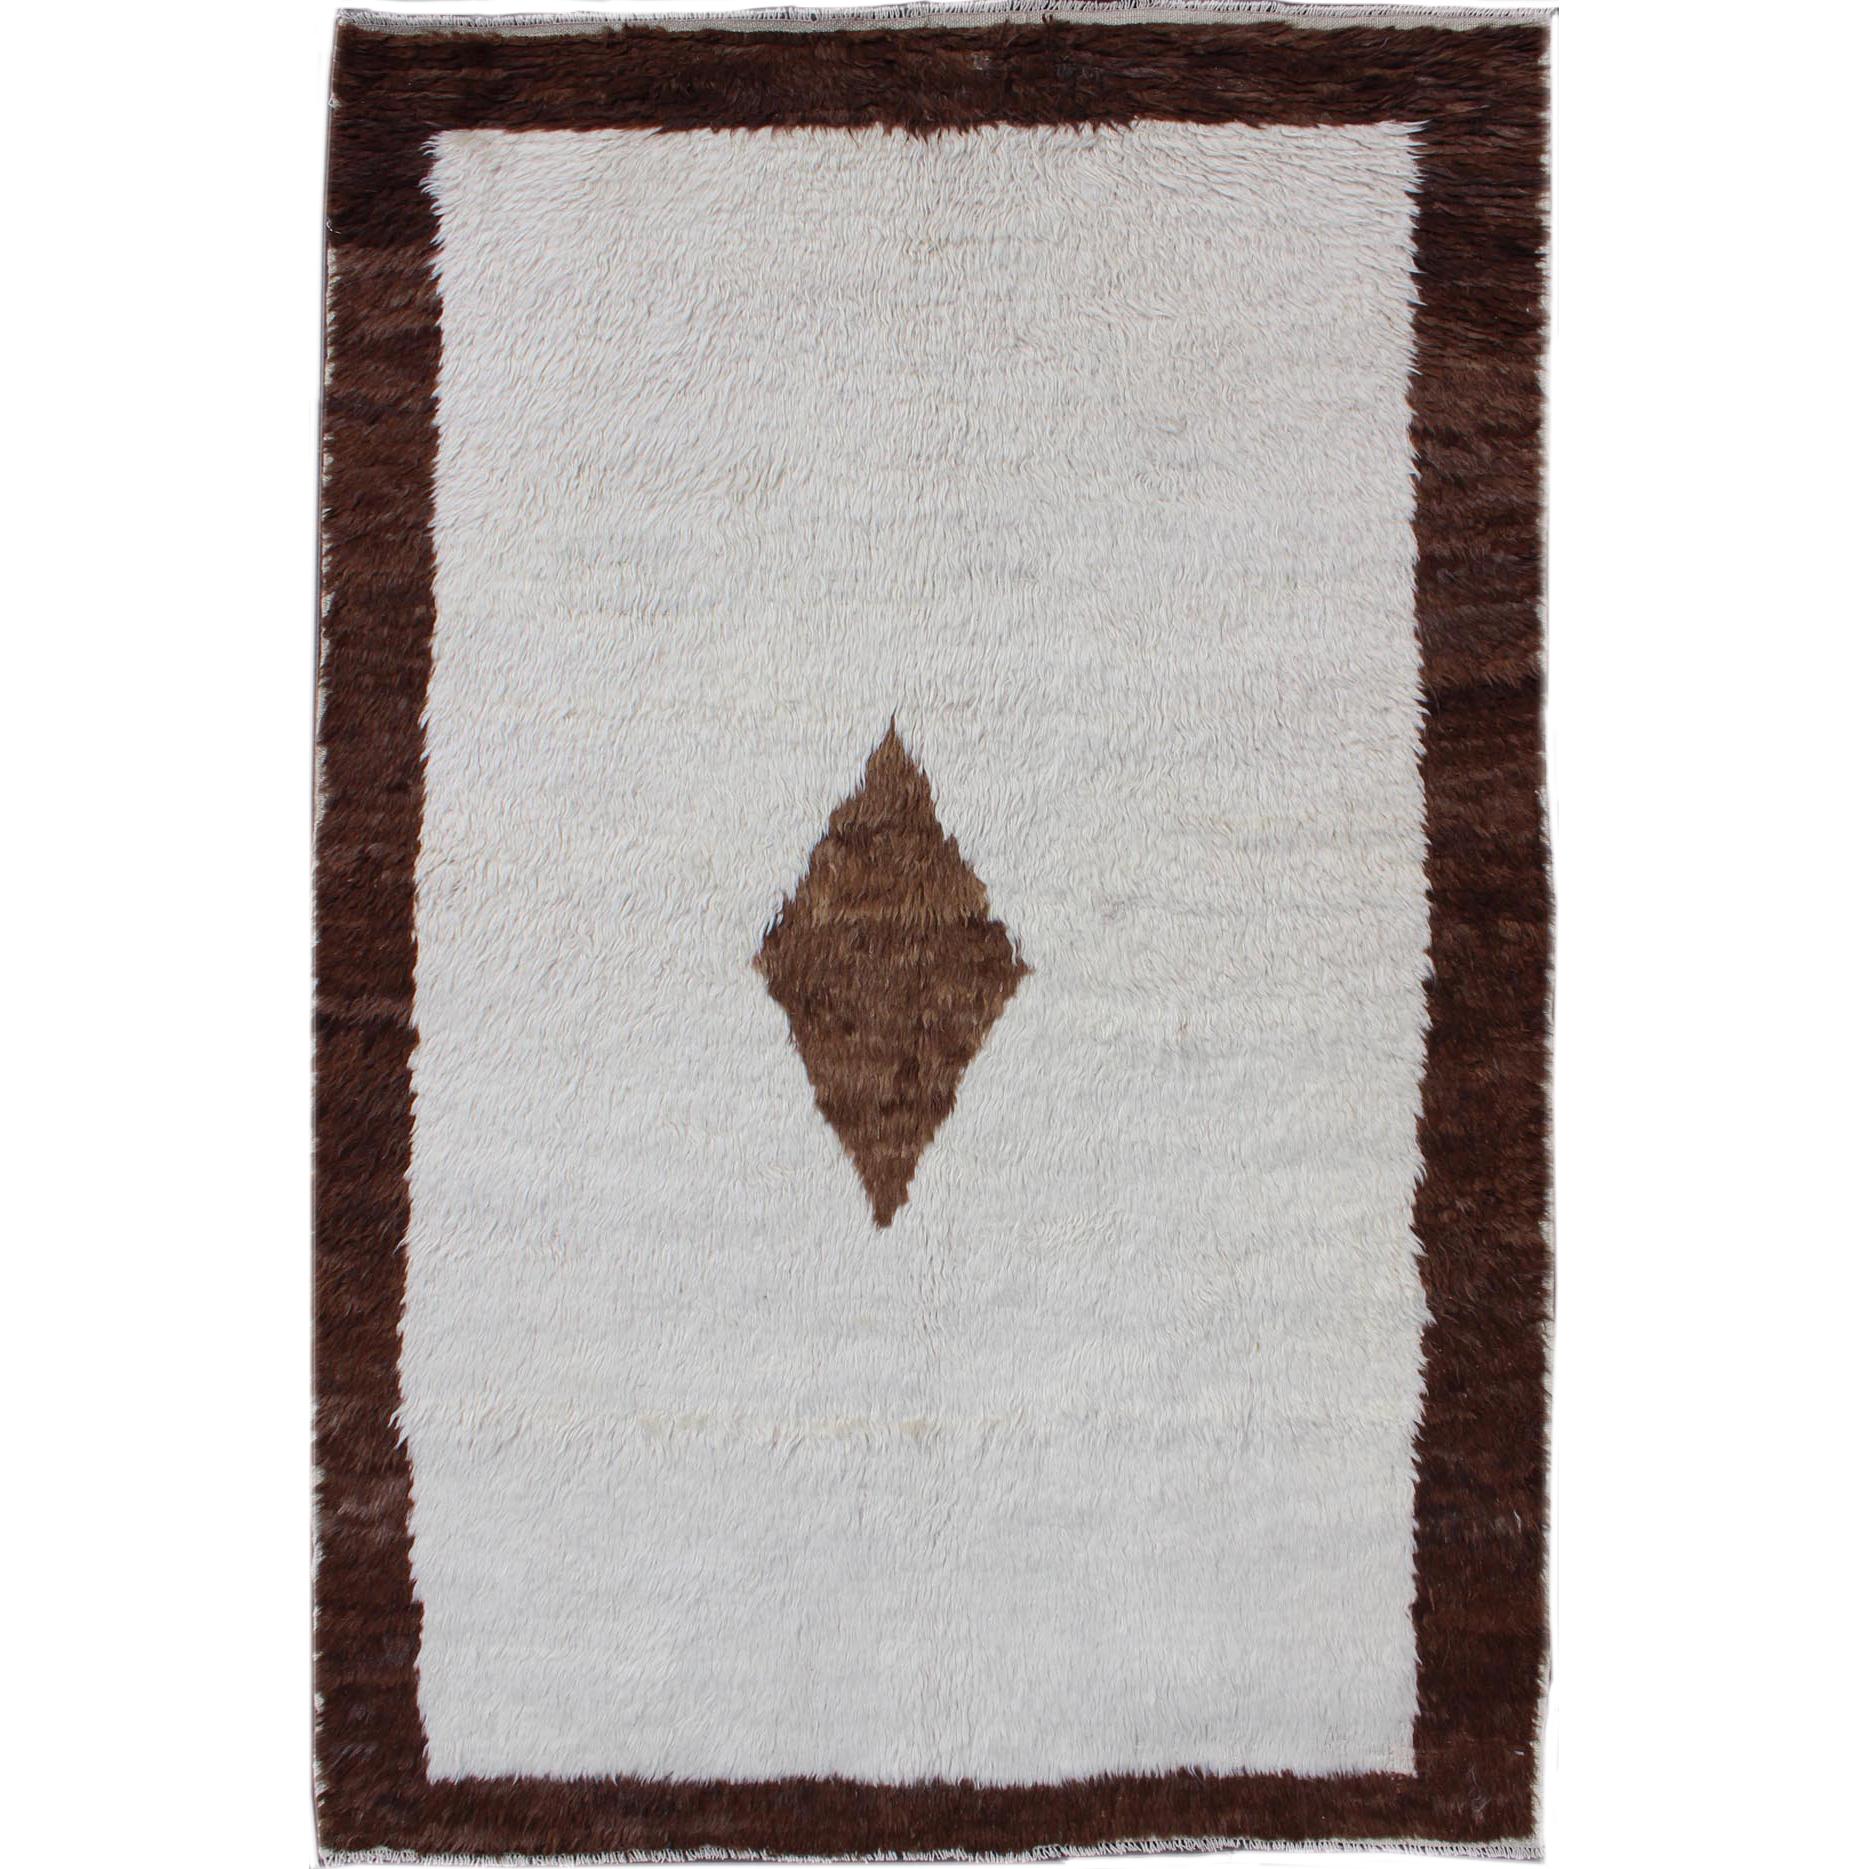 Amazing Vintage Turkish Tulu Rug with a minimalist Design in Off White and Brown